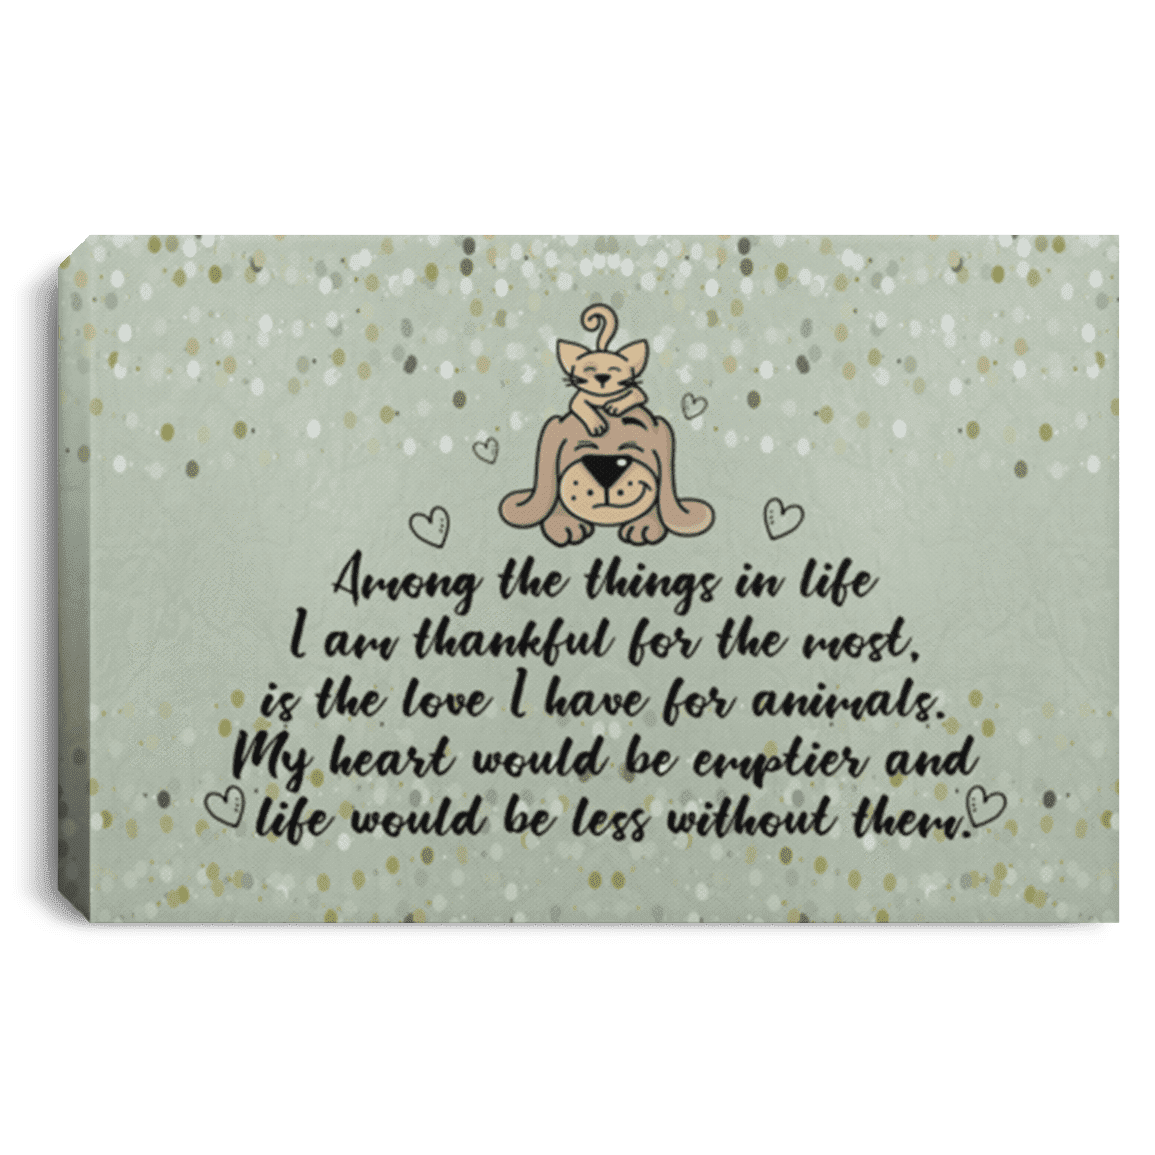 Among The things In Life - Wall Canvas.